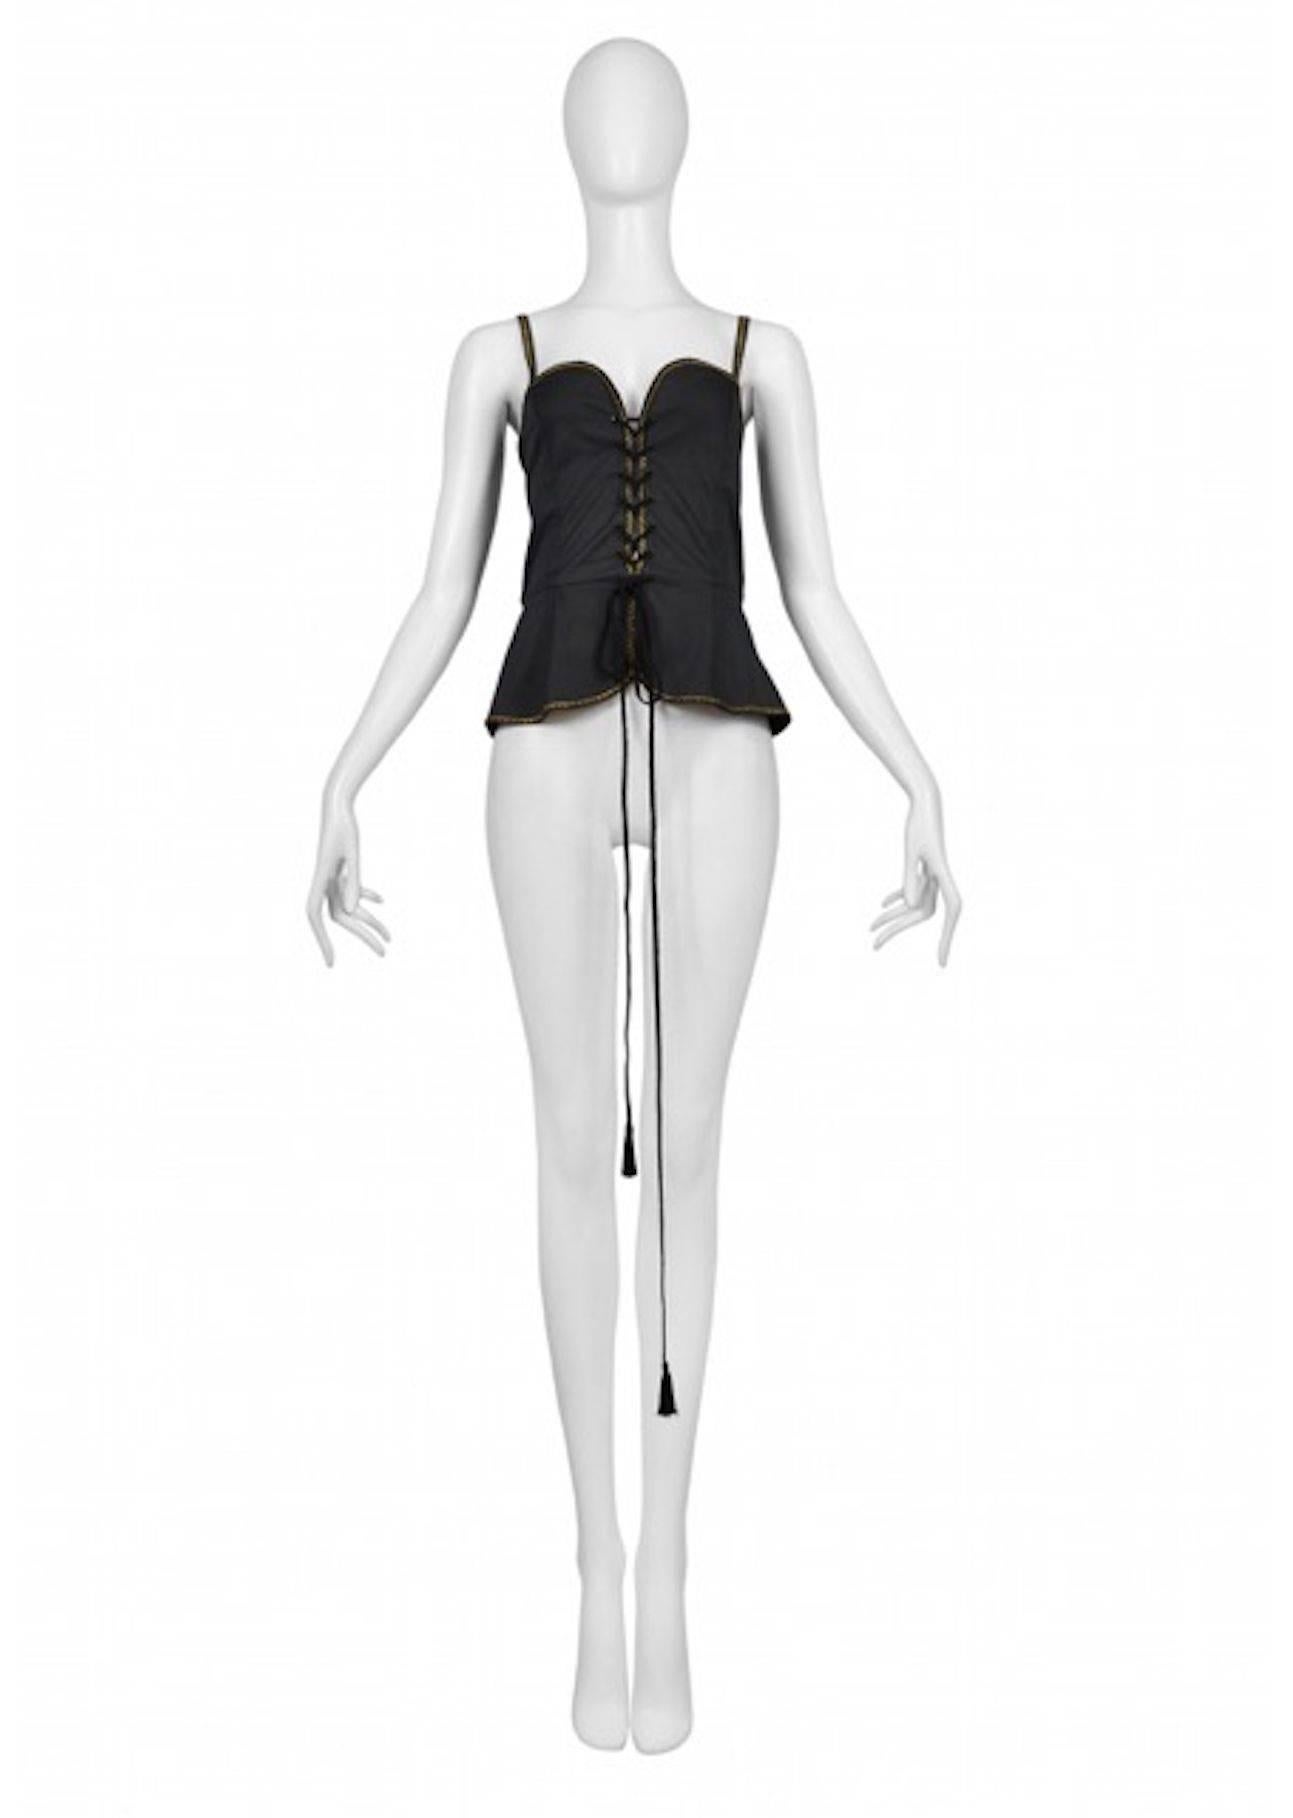 Vintage Yves Saint Laurent black safari corset tank featuring a built in peplum below the waist, gold rickrack trim along the edges and spaghetti straps, and tassel cording lacing up the front.
Please inquire for additional images.